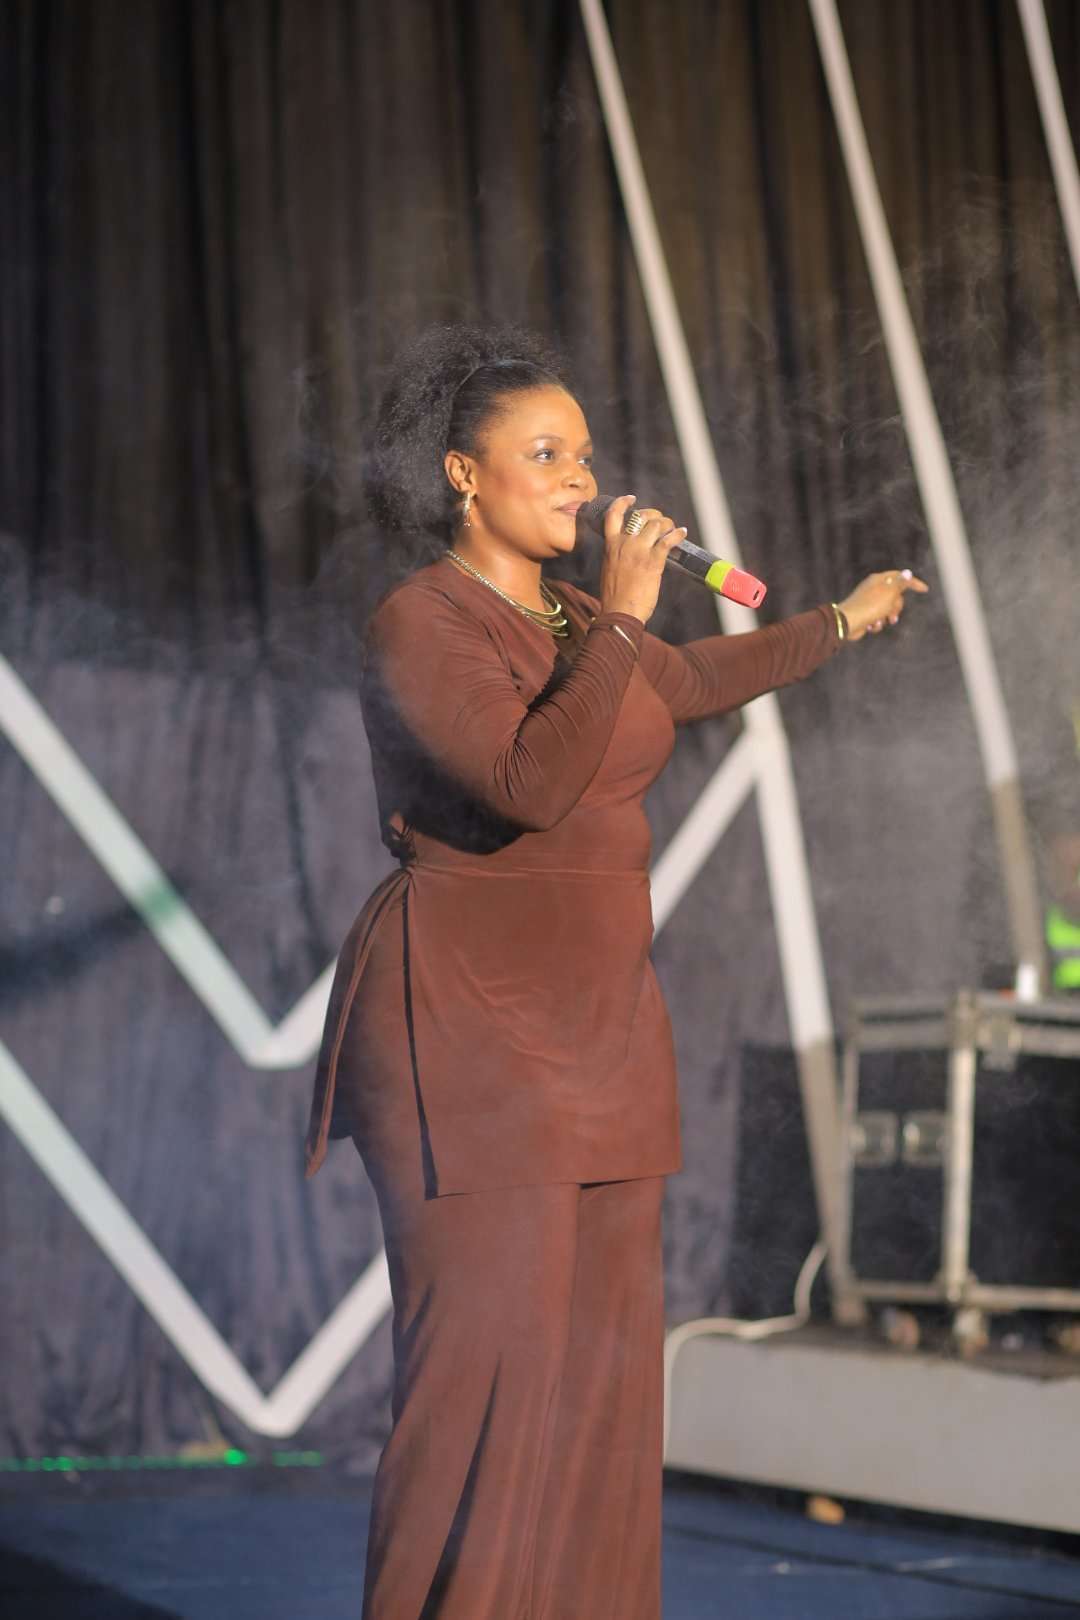 Gabbie Ntaate performing at an event